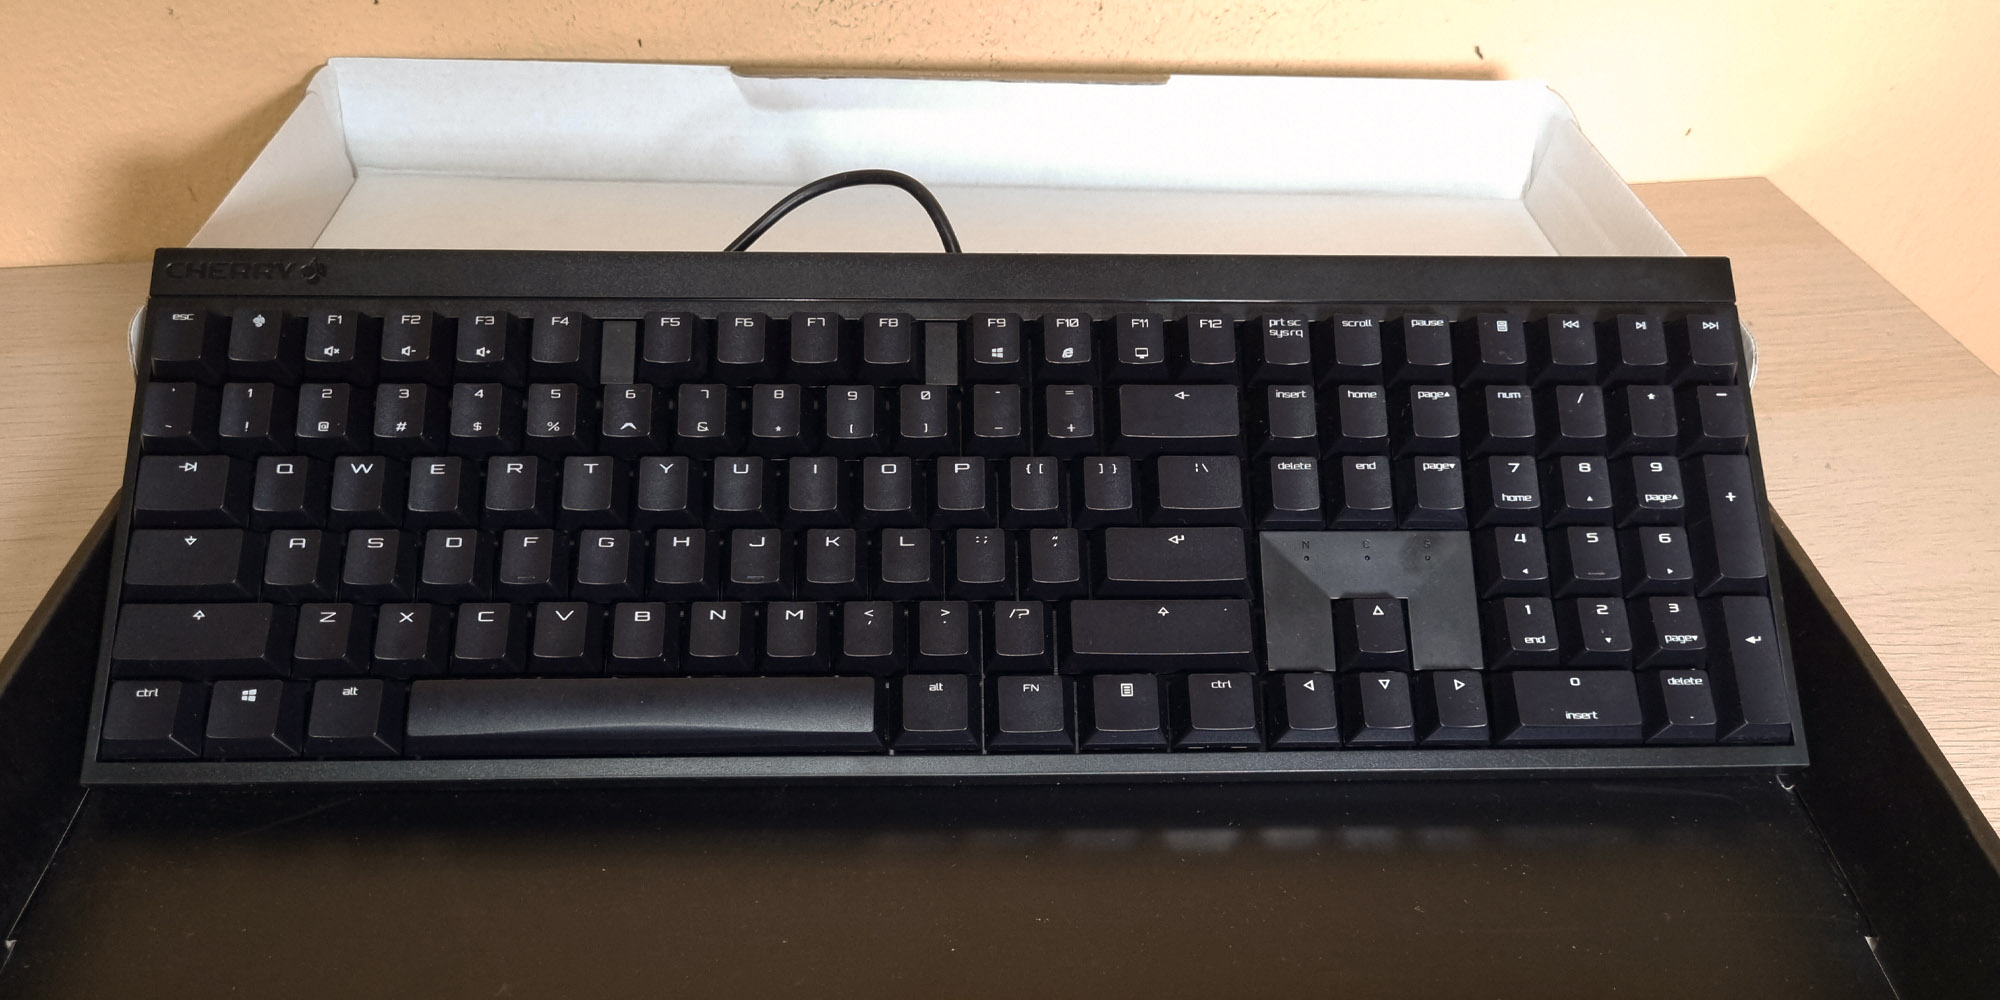 Review - CHERRY MX 2.0S - Believe in the roots when you don't